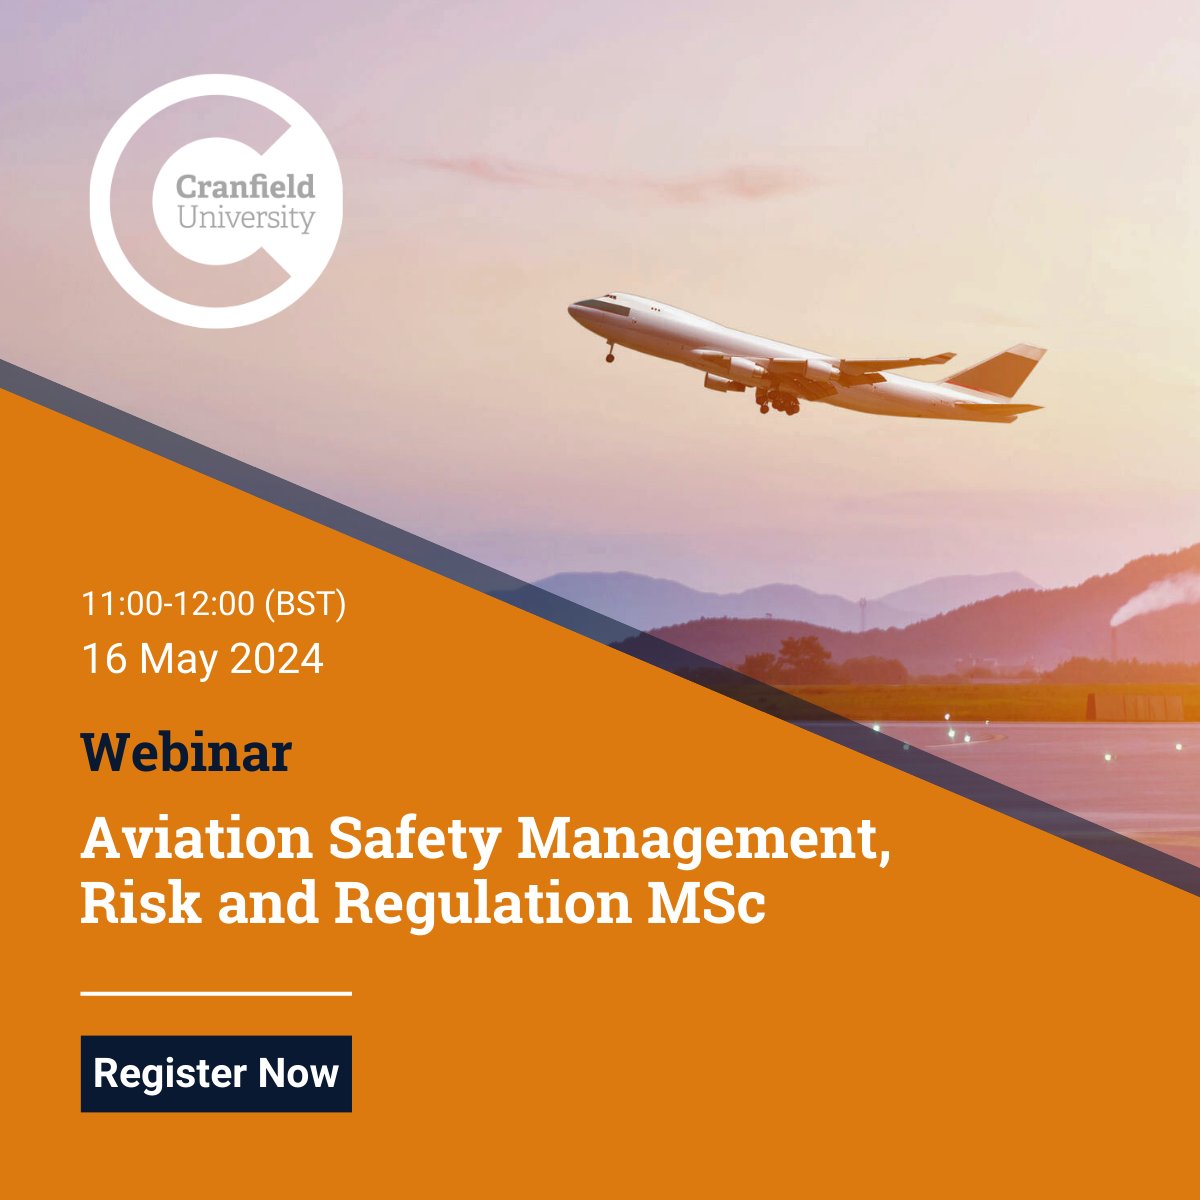 Join us & UK CAA International for our Aviation Safety Webinar! Get insights on risk, regulation & the future of flight. Perfect for career starters & enthusiasts. Register now! #AviationSafety #webinar Register Now: bit.ly/4aBtEmU